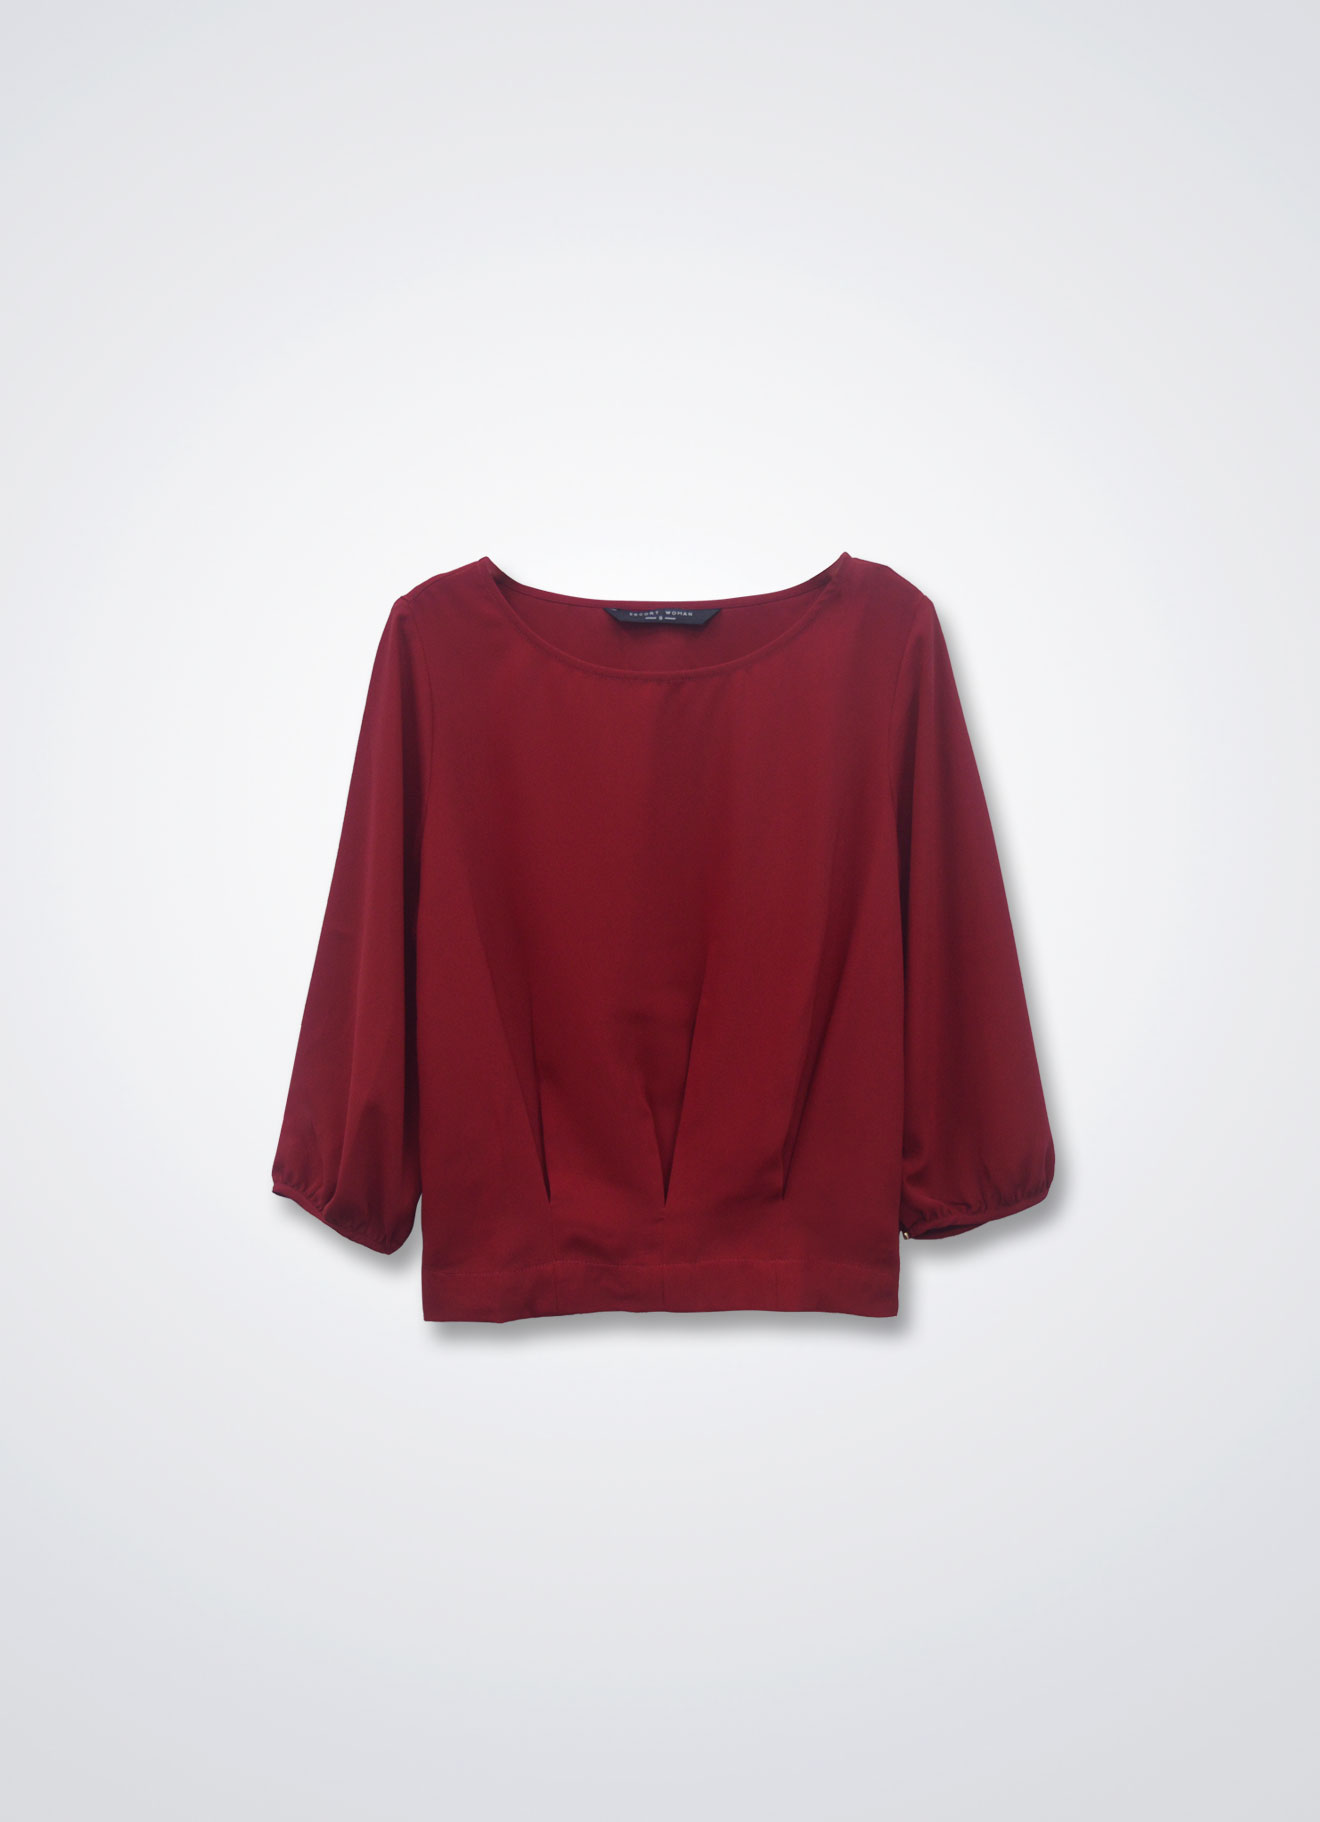 Tango-Red by Sleeve Top